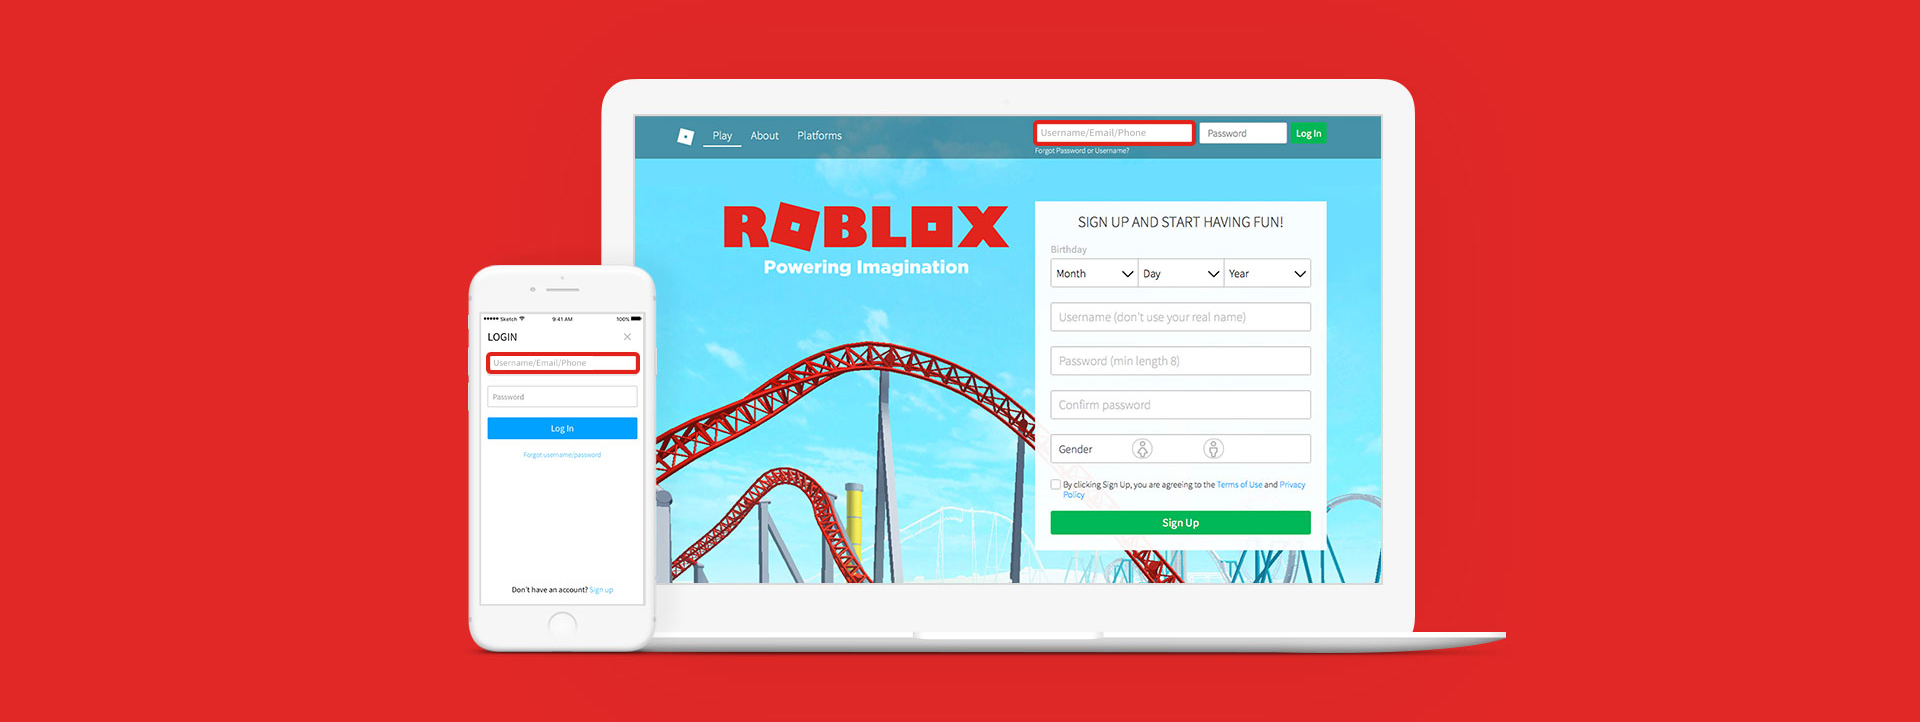 New Ways To Log In To Roblox Roblox Blog